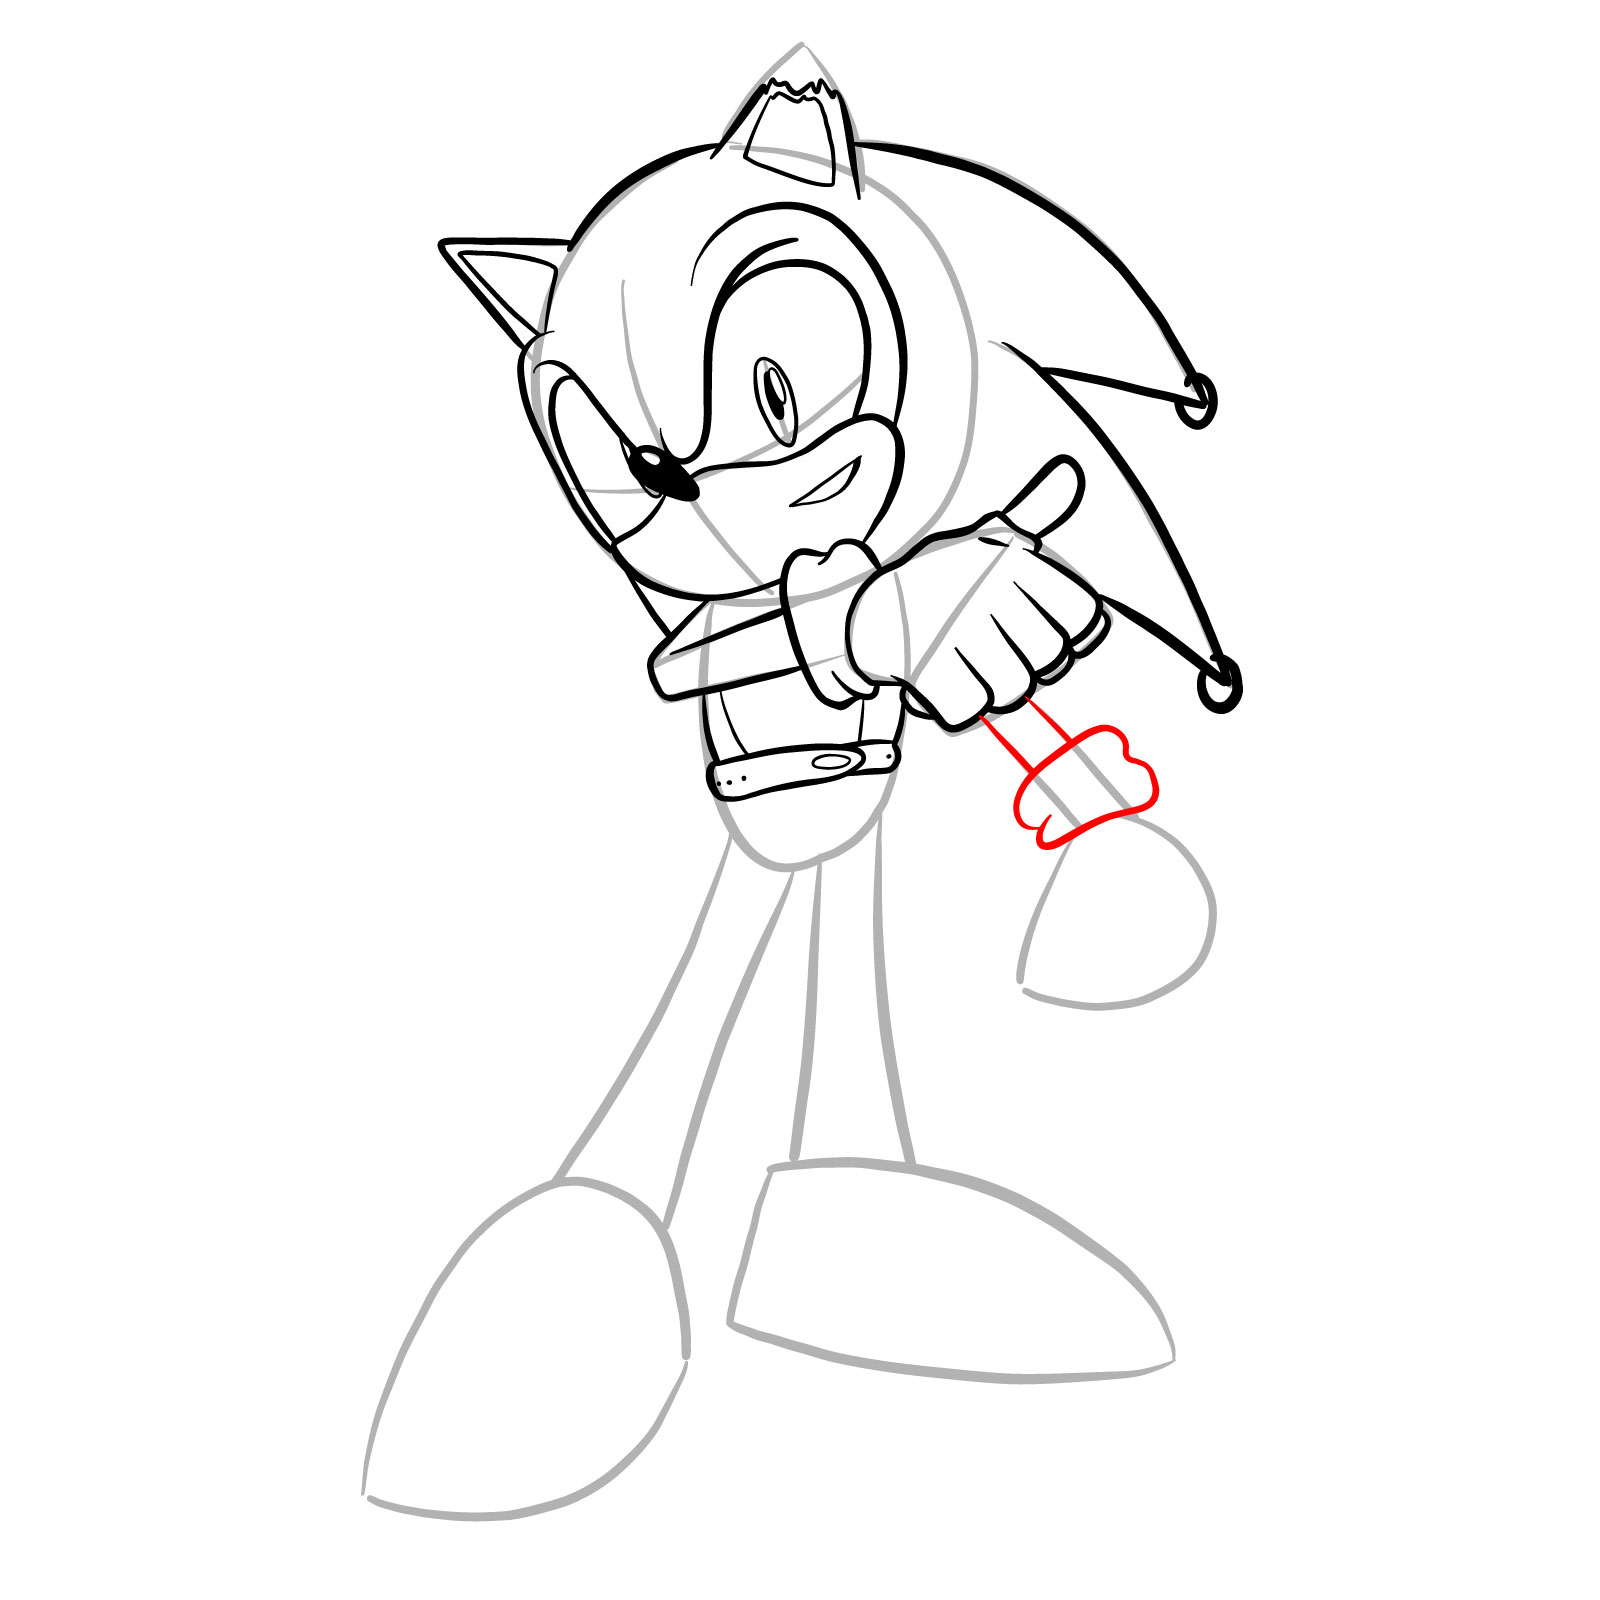 How to draw Coldsteel the Hedgehog - step 22